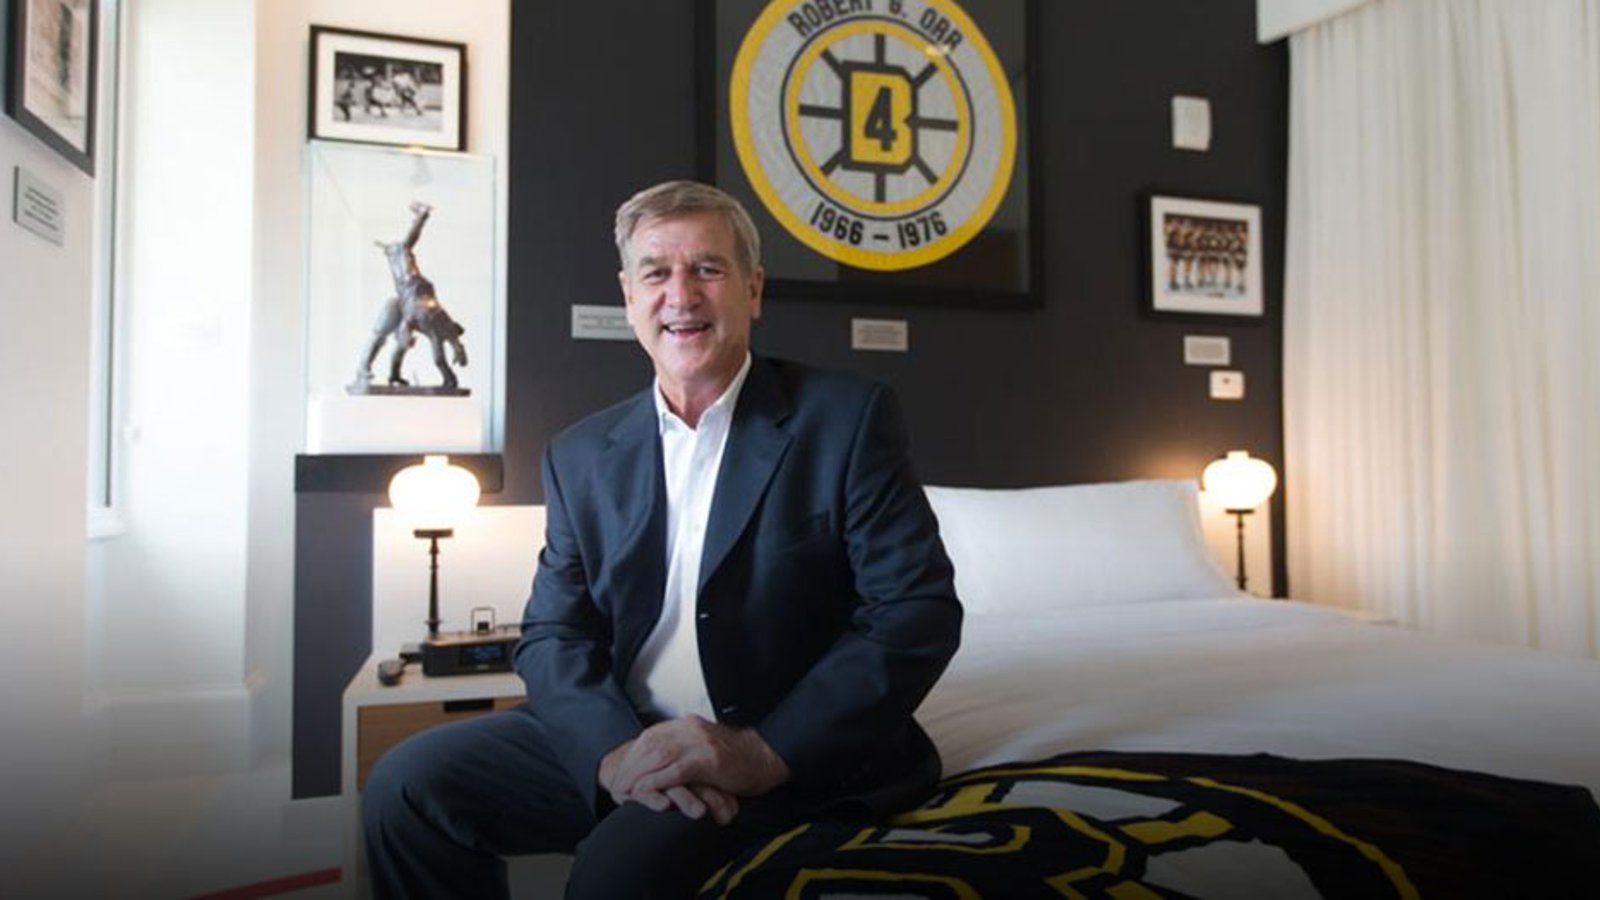 A must stay for Bruins fans: The Bobby Orr Suite